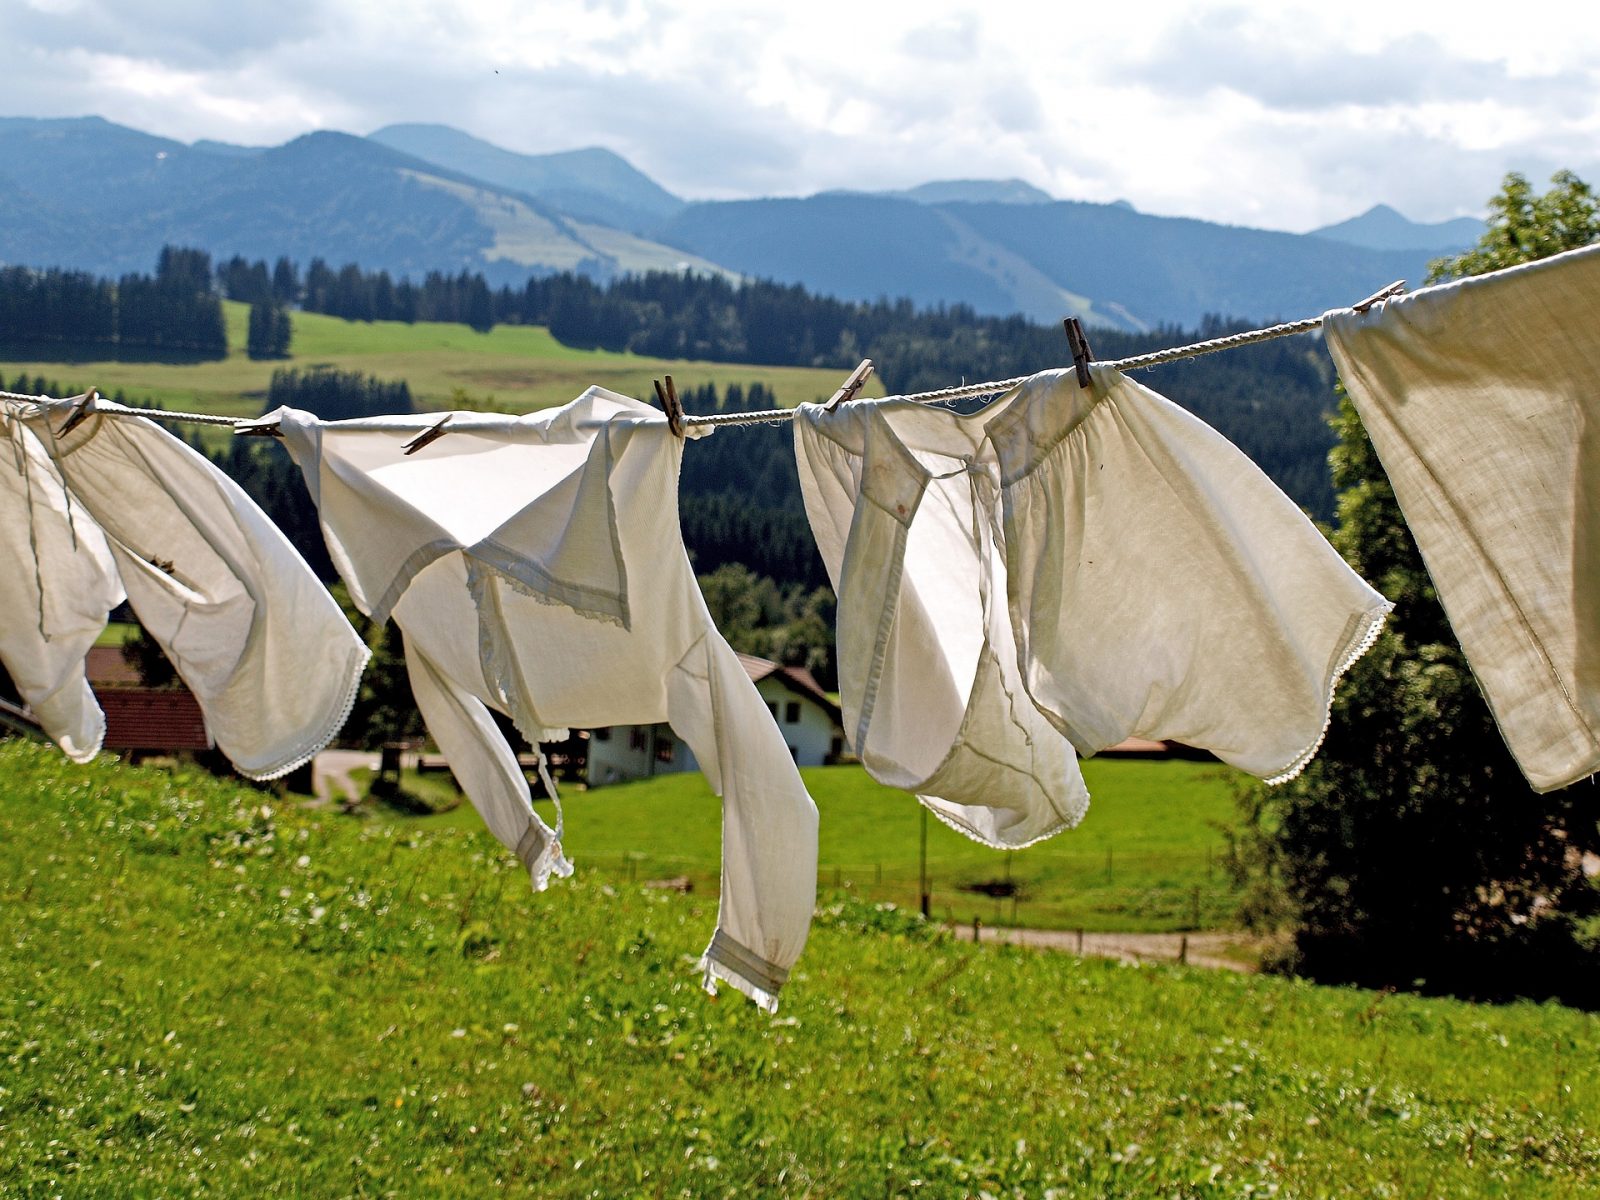 clothes drying on line